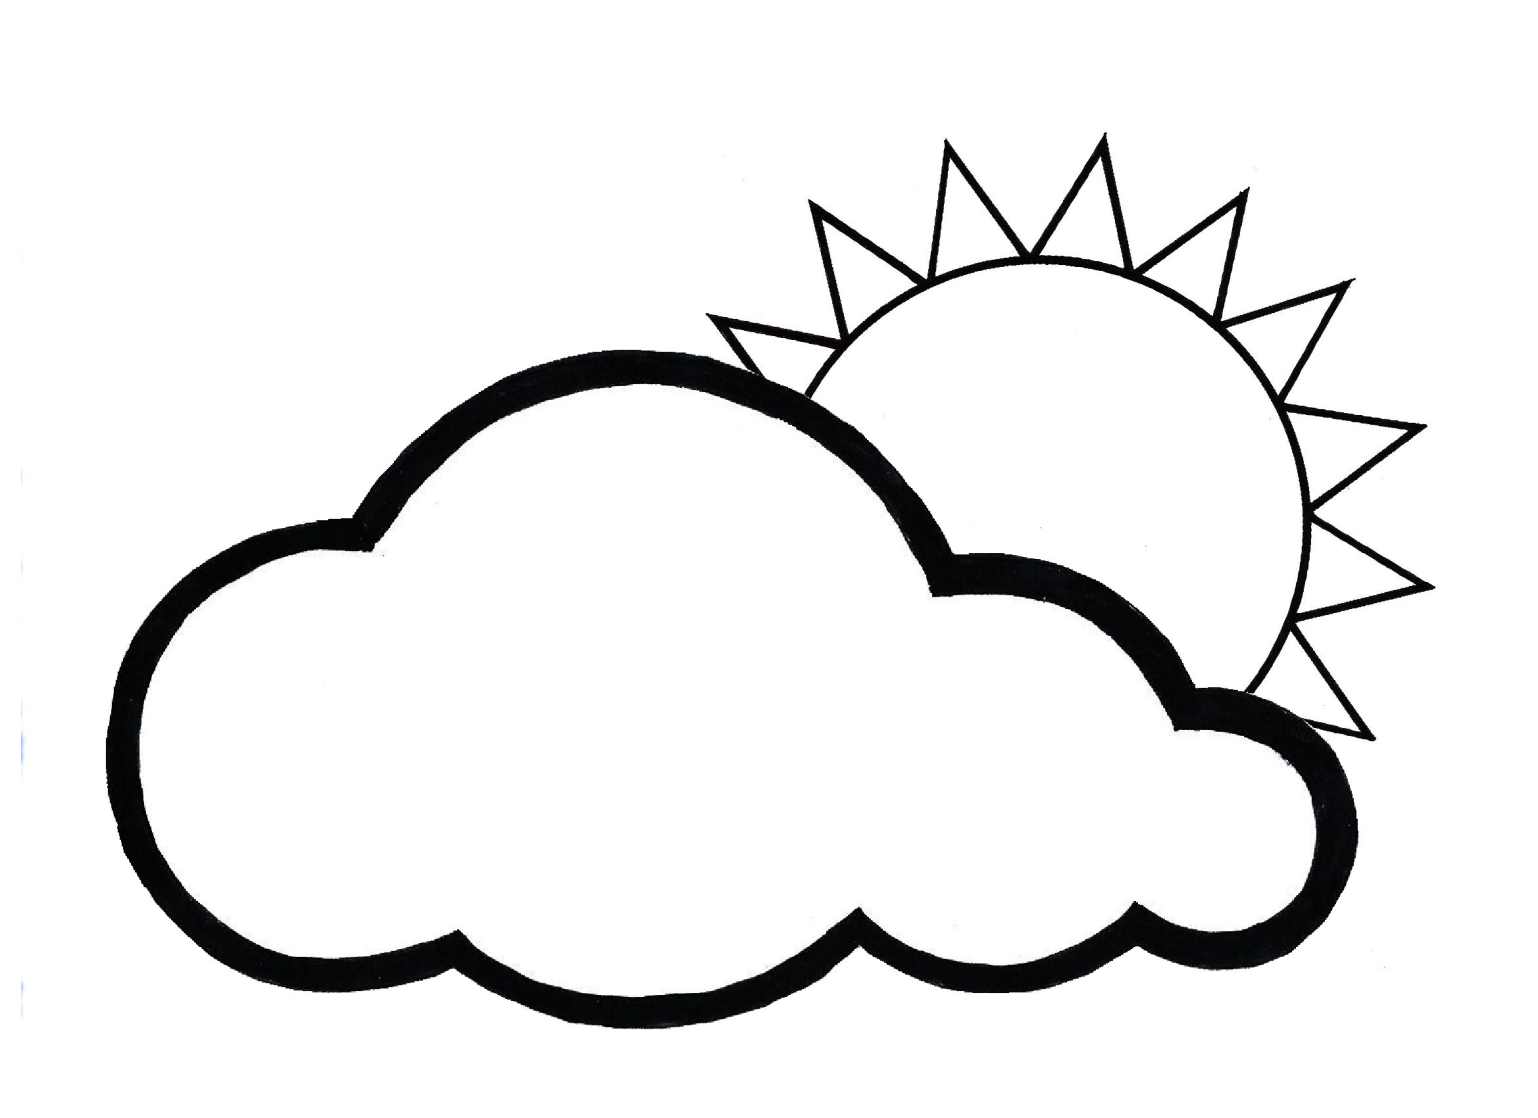 coloring-pages-sun-and-cloud-nature-printable-coloring-pages